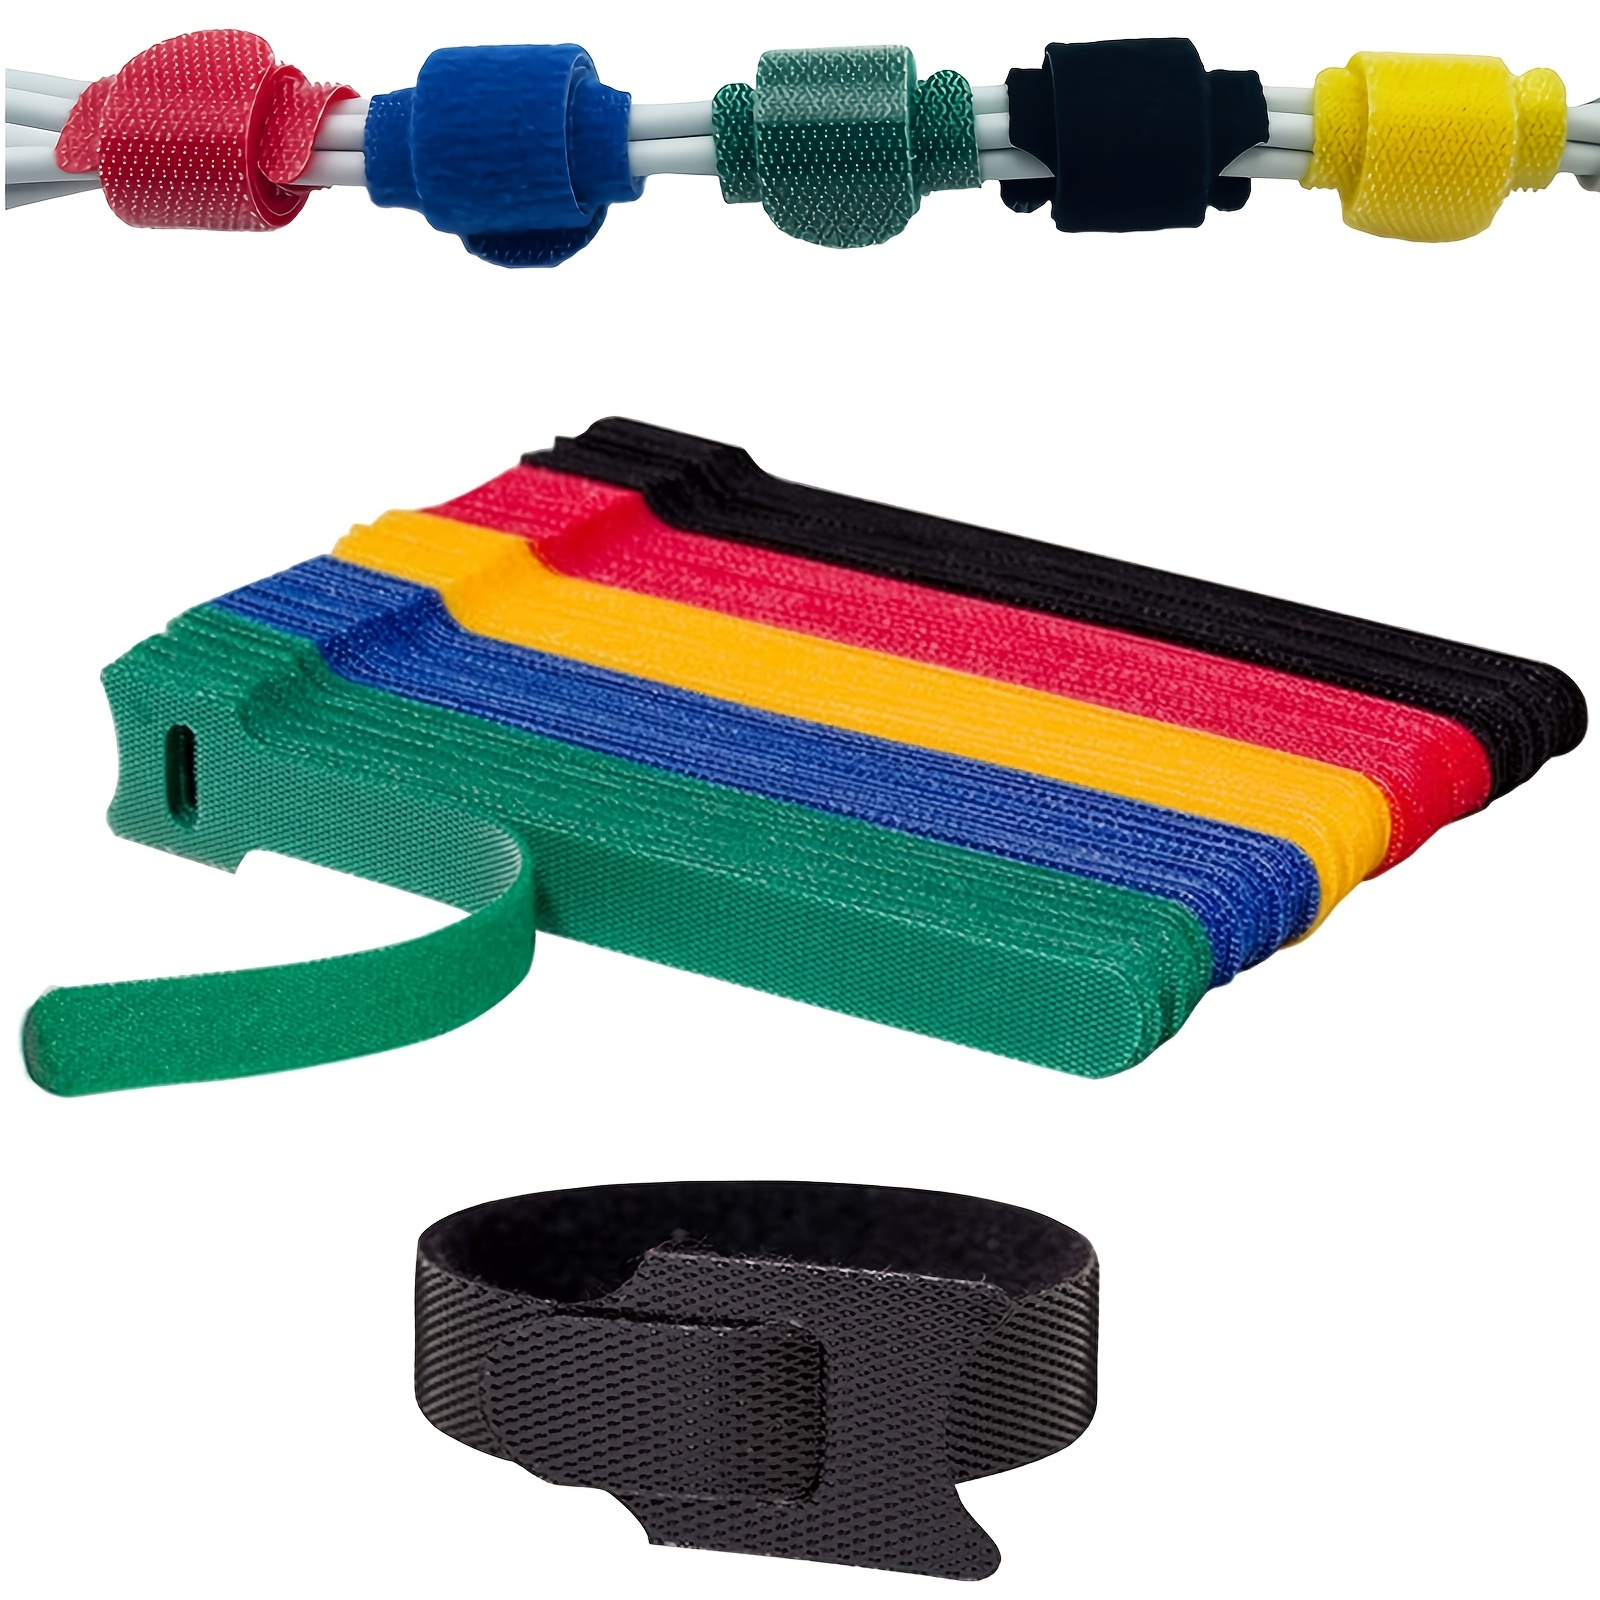 Wrap N Strap 6 Adjustable Straps for Cords and Cables, Cable Straps -   Canada